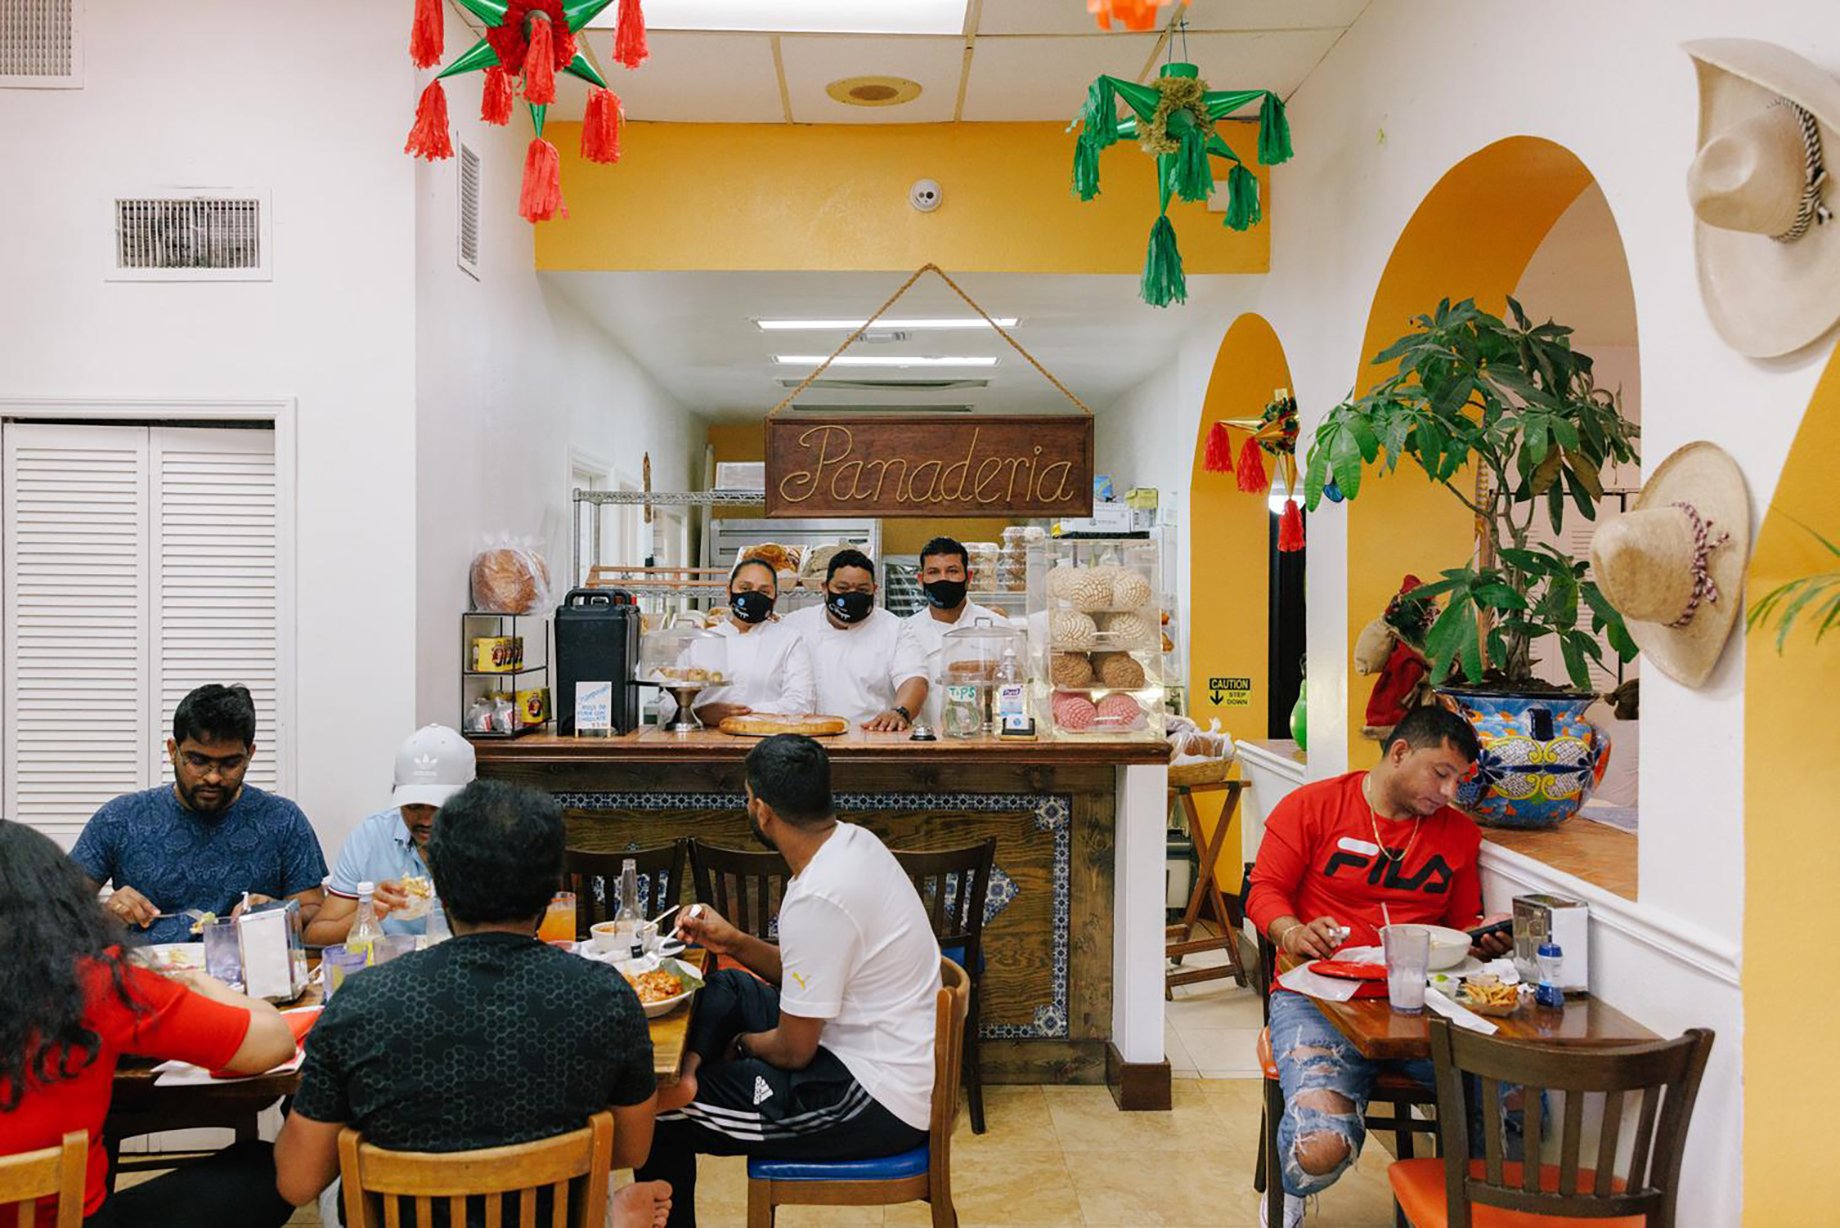 La Migaja Mexican Bakery shot by James Jackman for The New York Times